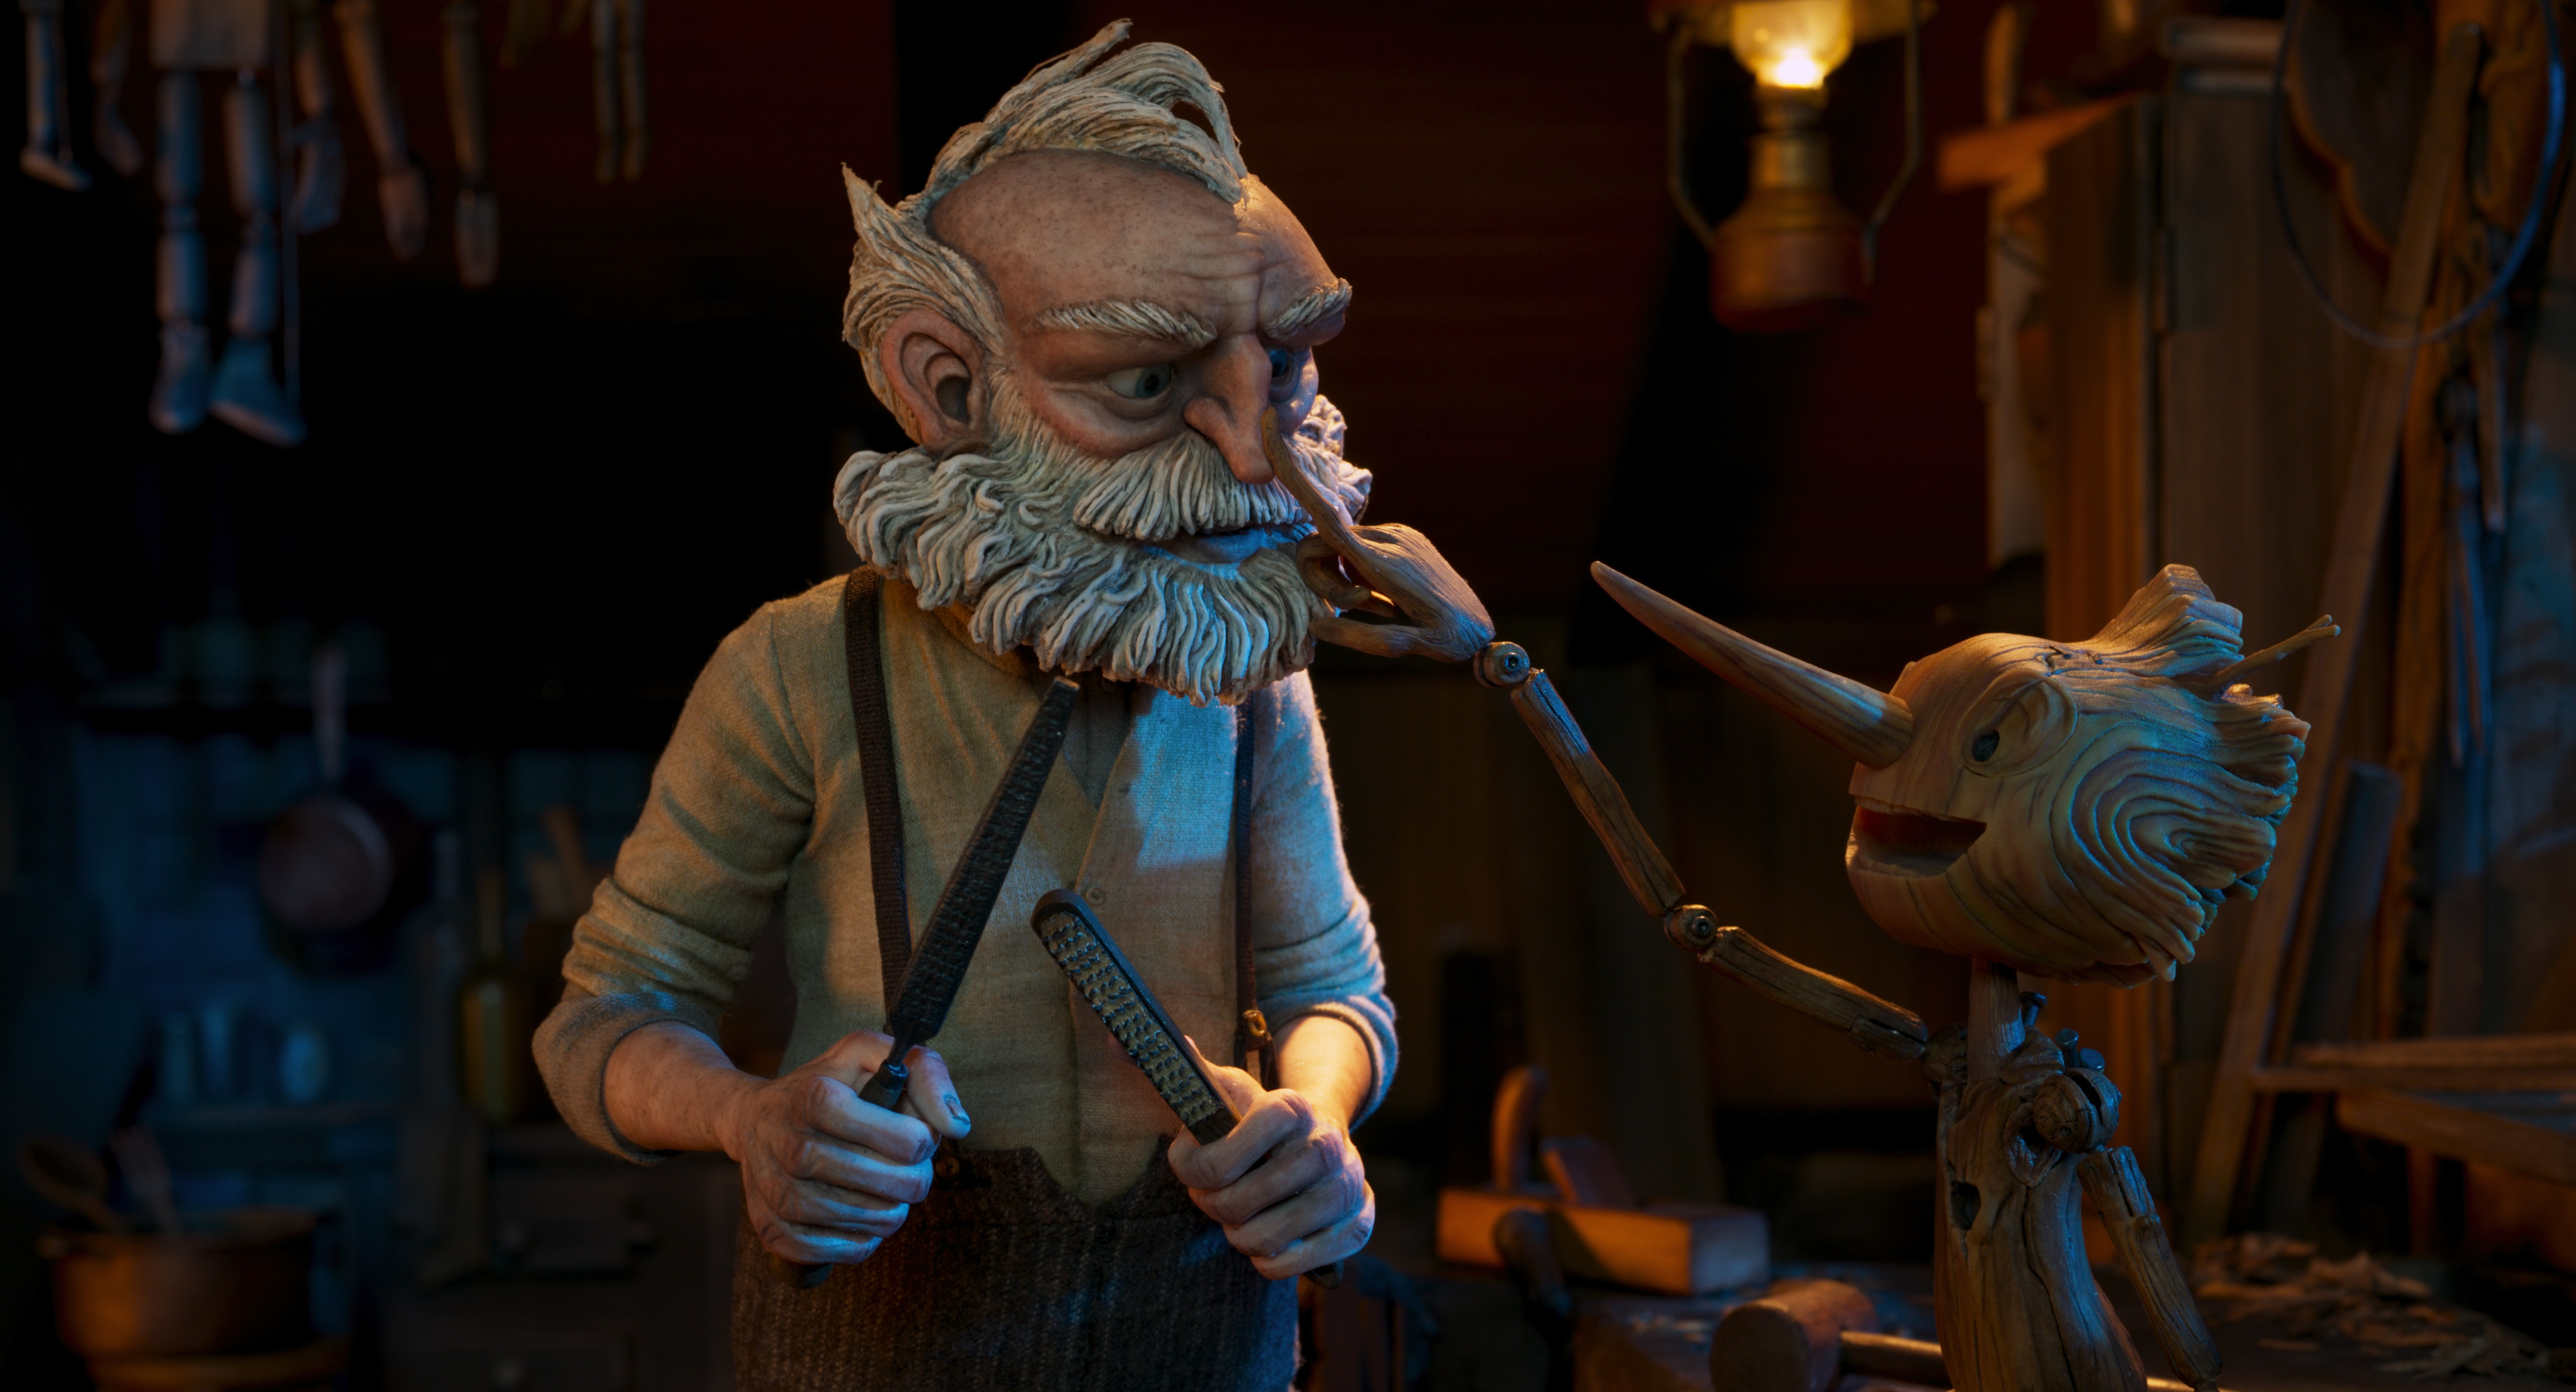 The wooden boy Pinocchio presses down Geppetto’s nose playfully. Geppetto is holding some tools